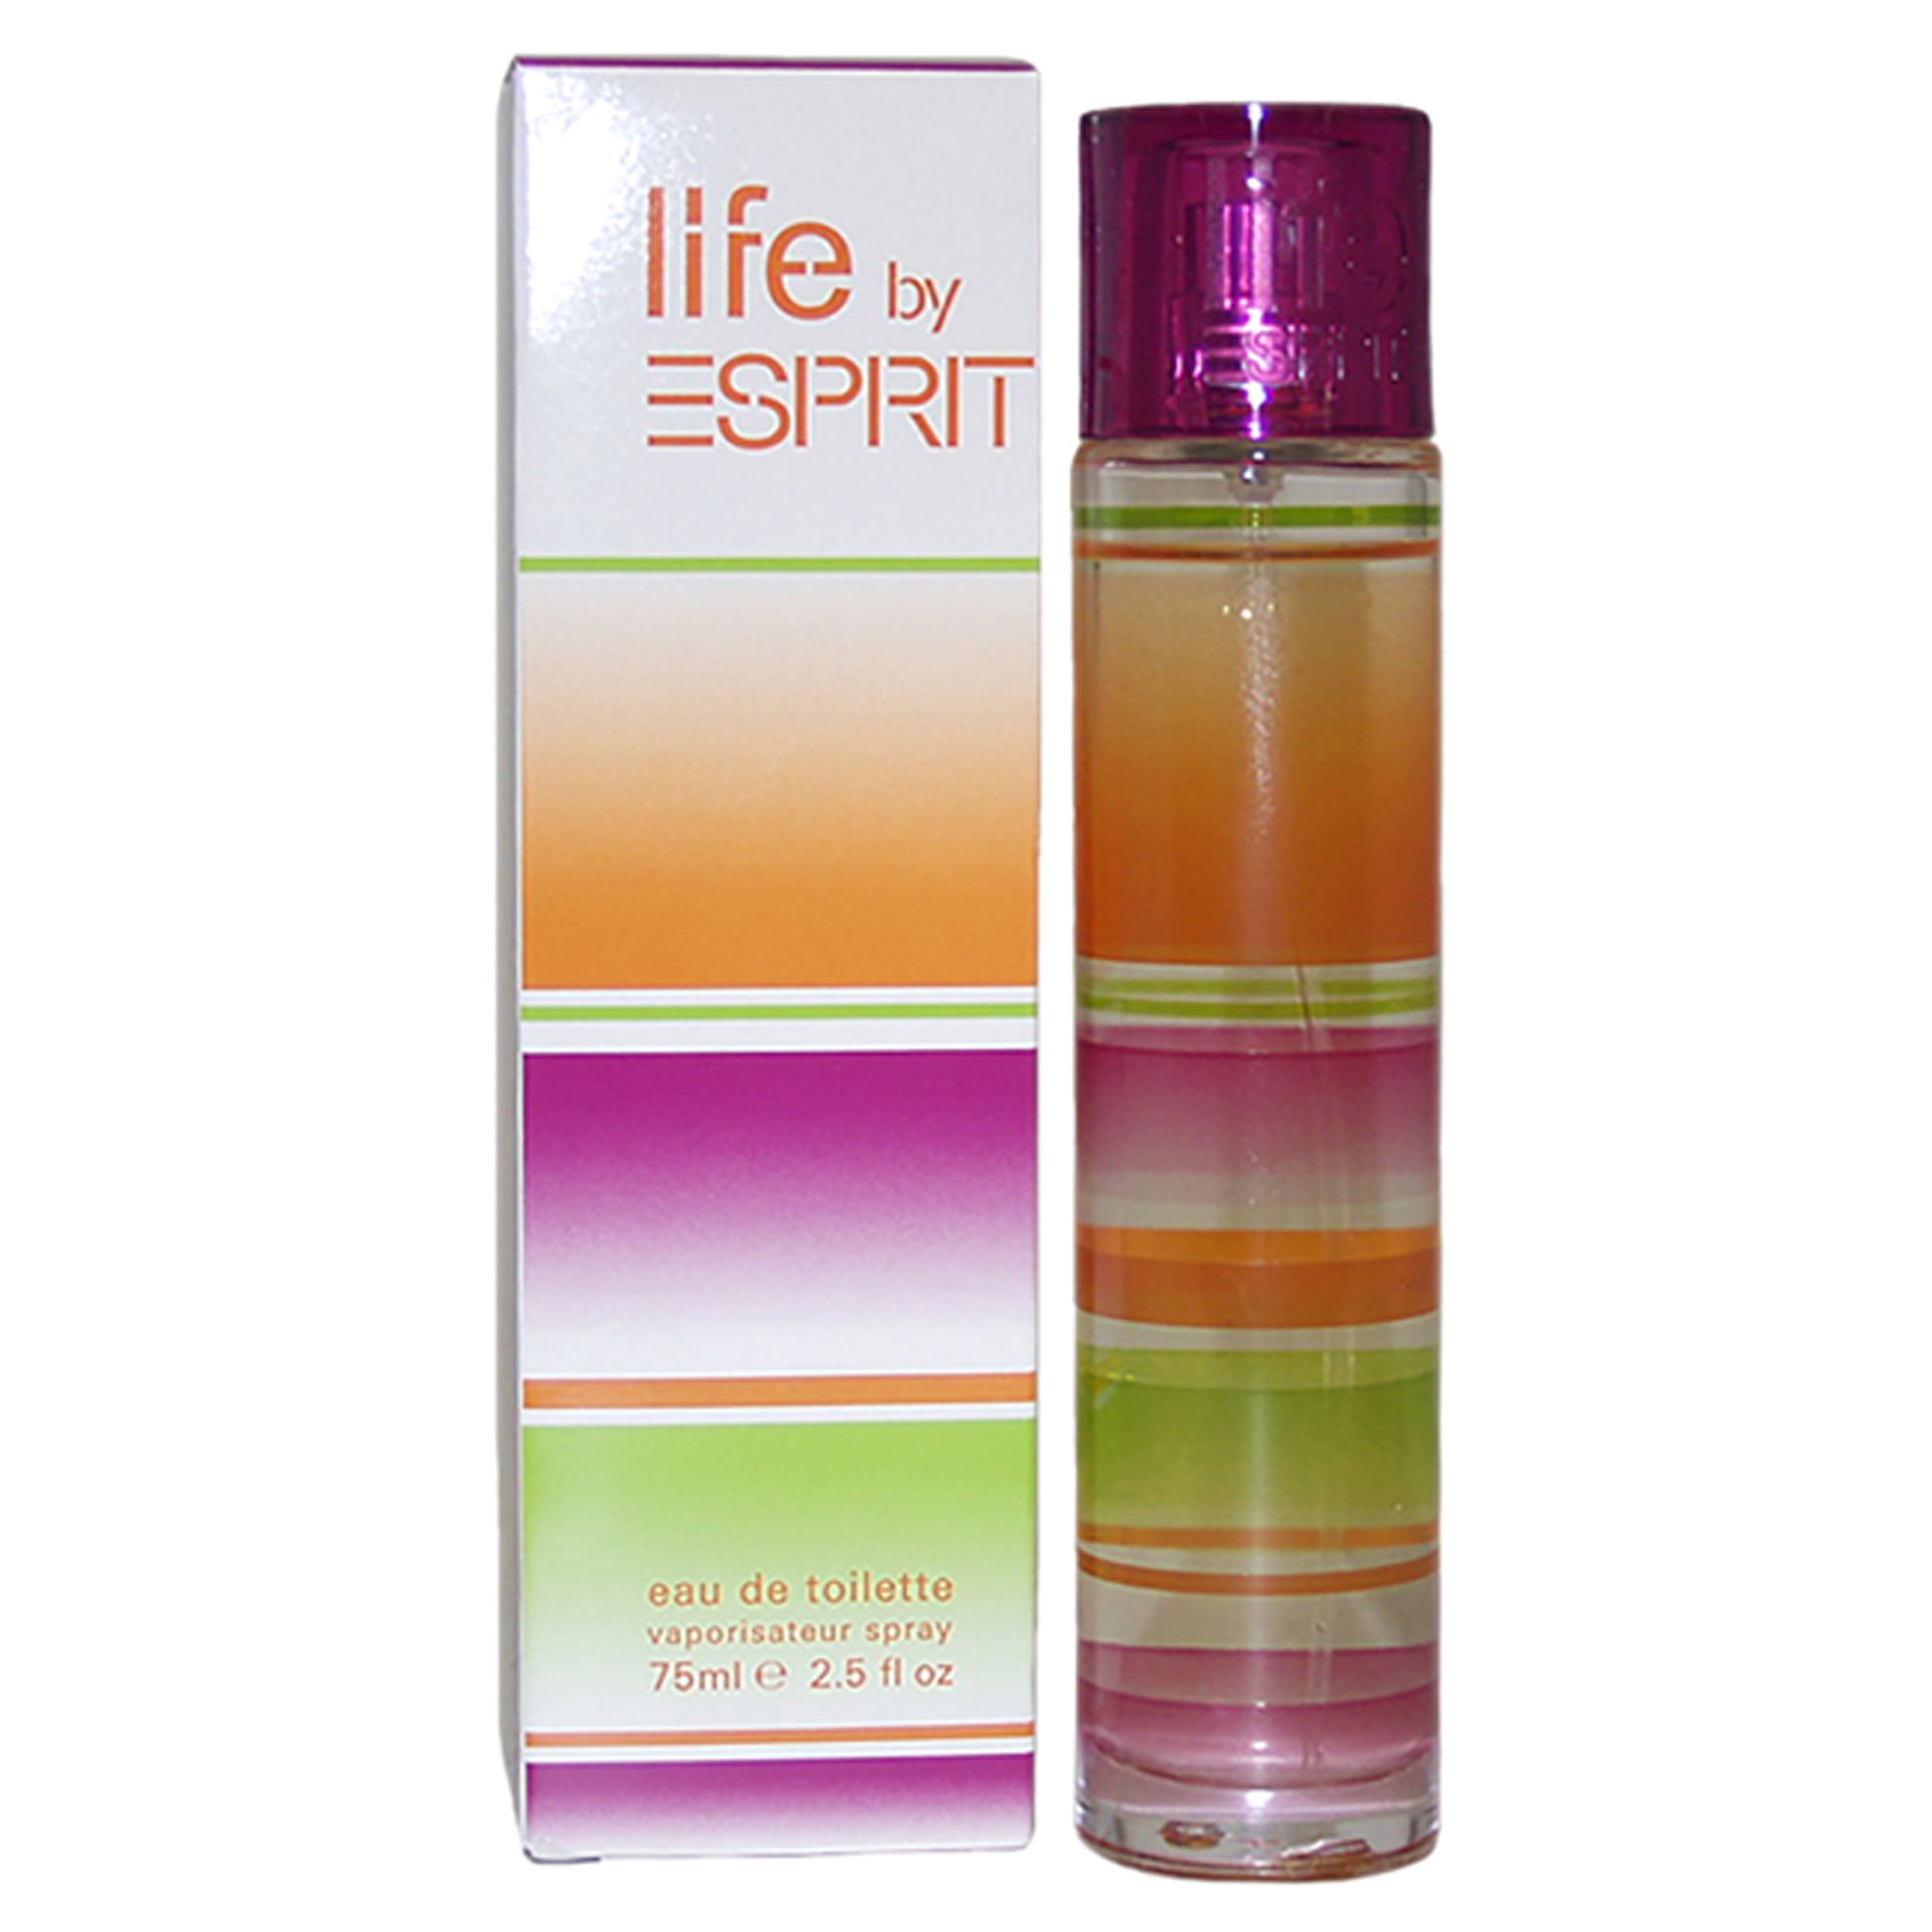 Life by Esprit